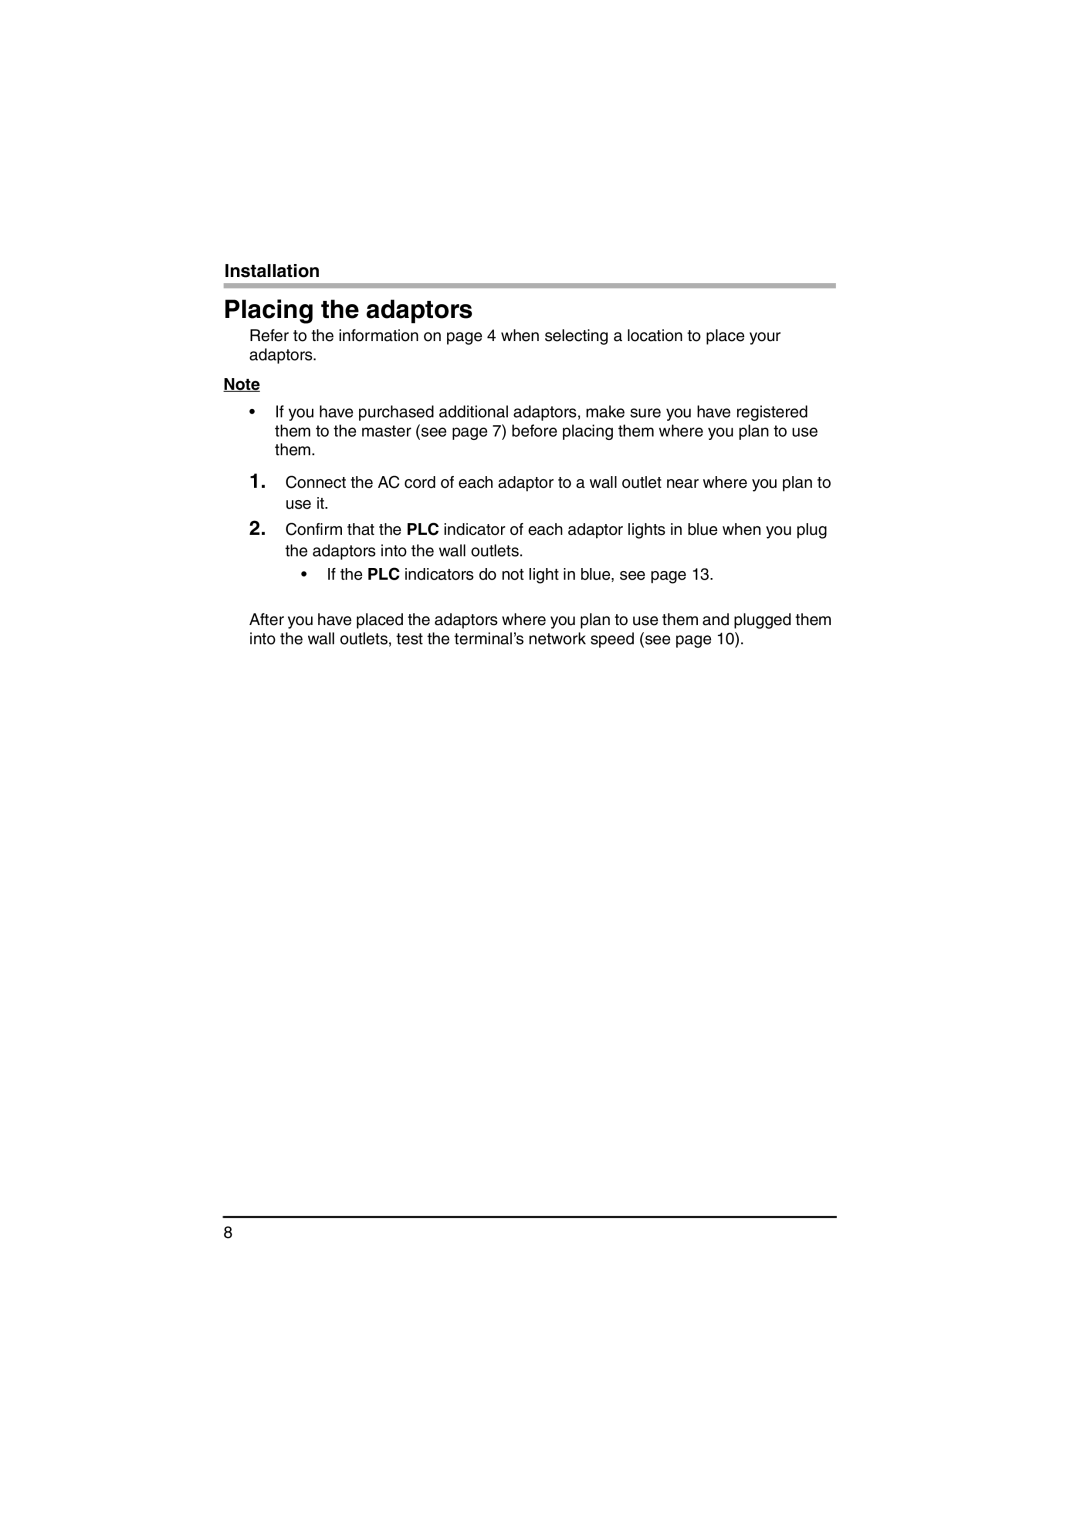 Panasonic BL-PA100A important safety instructions Placing the adaptors, Installation 